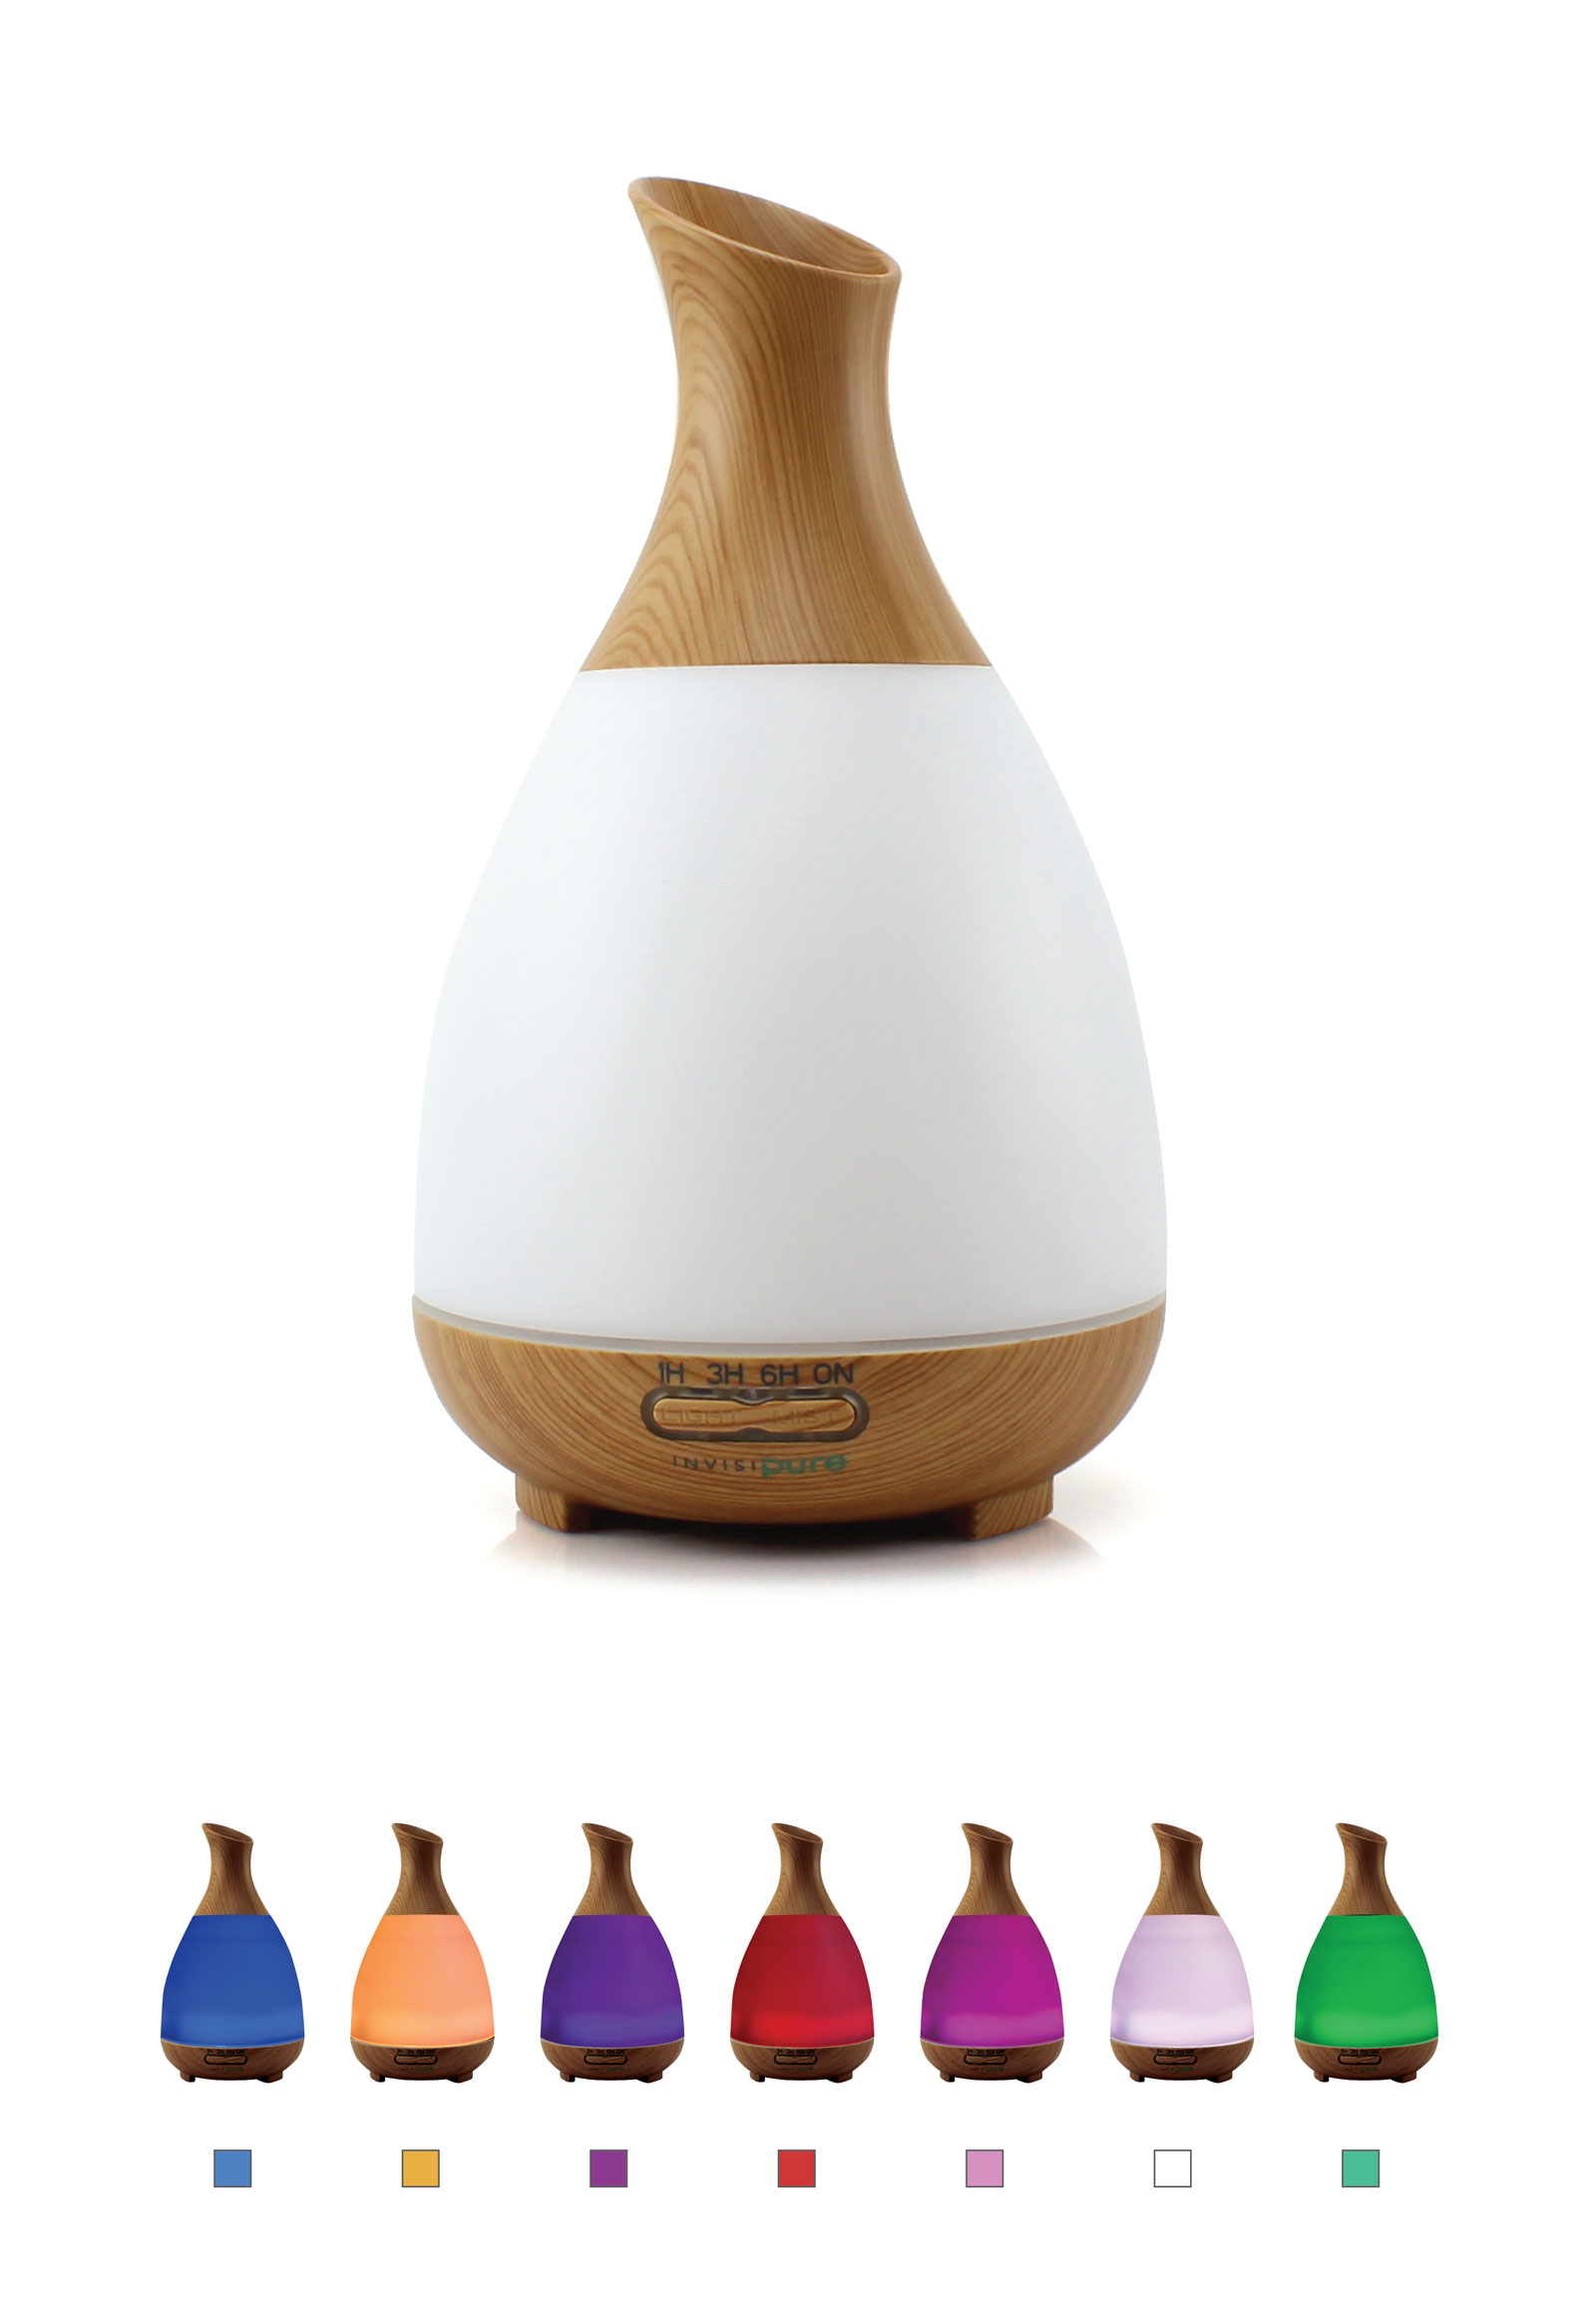 InvisiPure Alta Aromatherapy Diffuser - 200ml - Adjustable Mist, 7 Color LED, and Automatic Shutoff - image 1 of 4